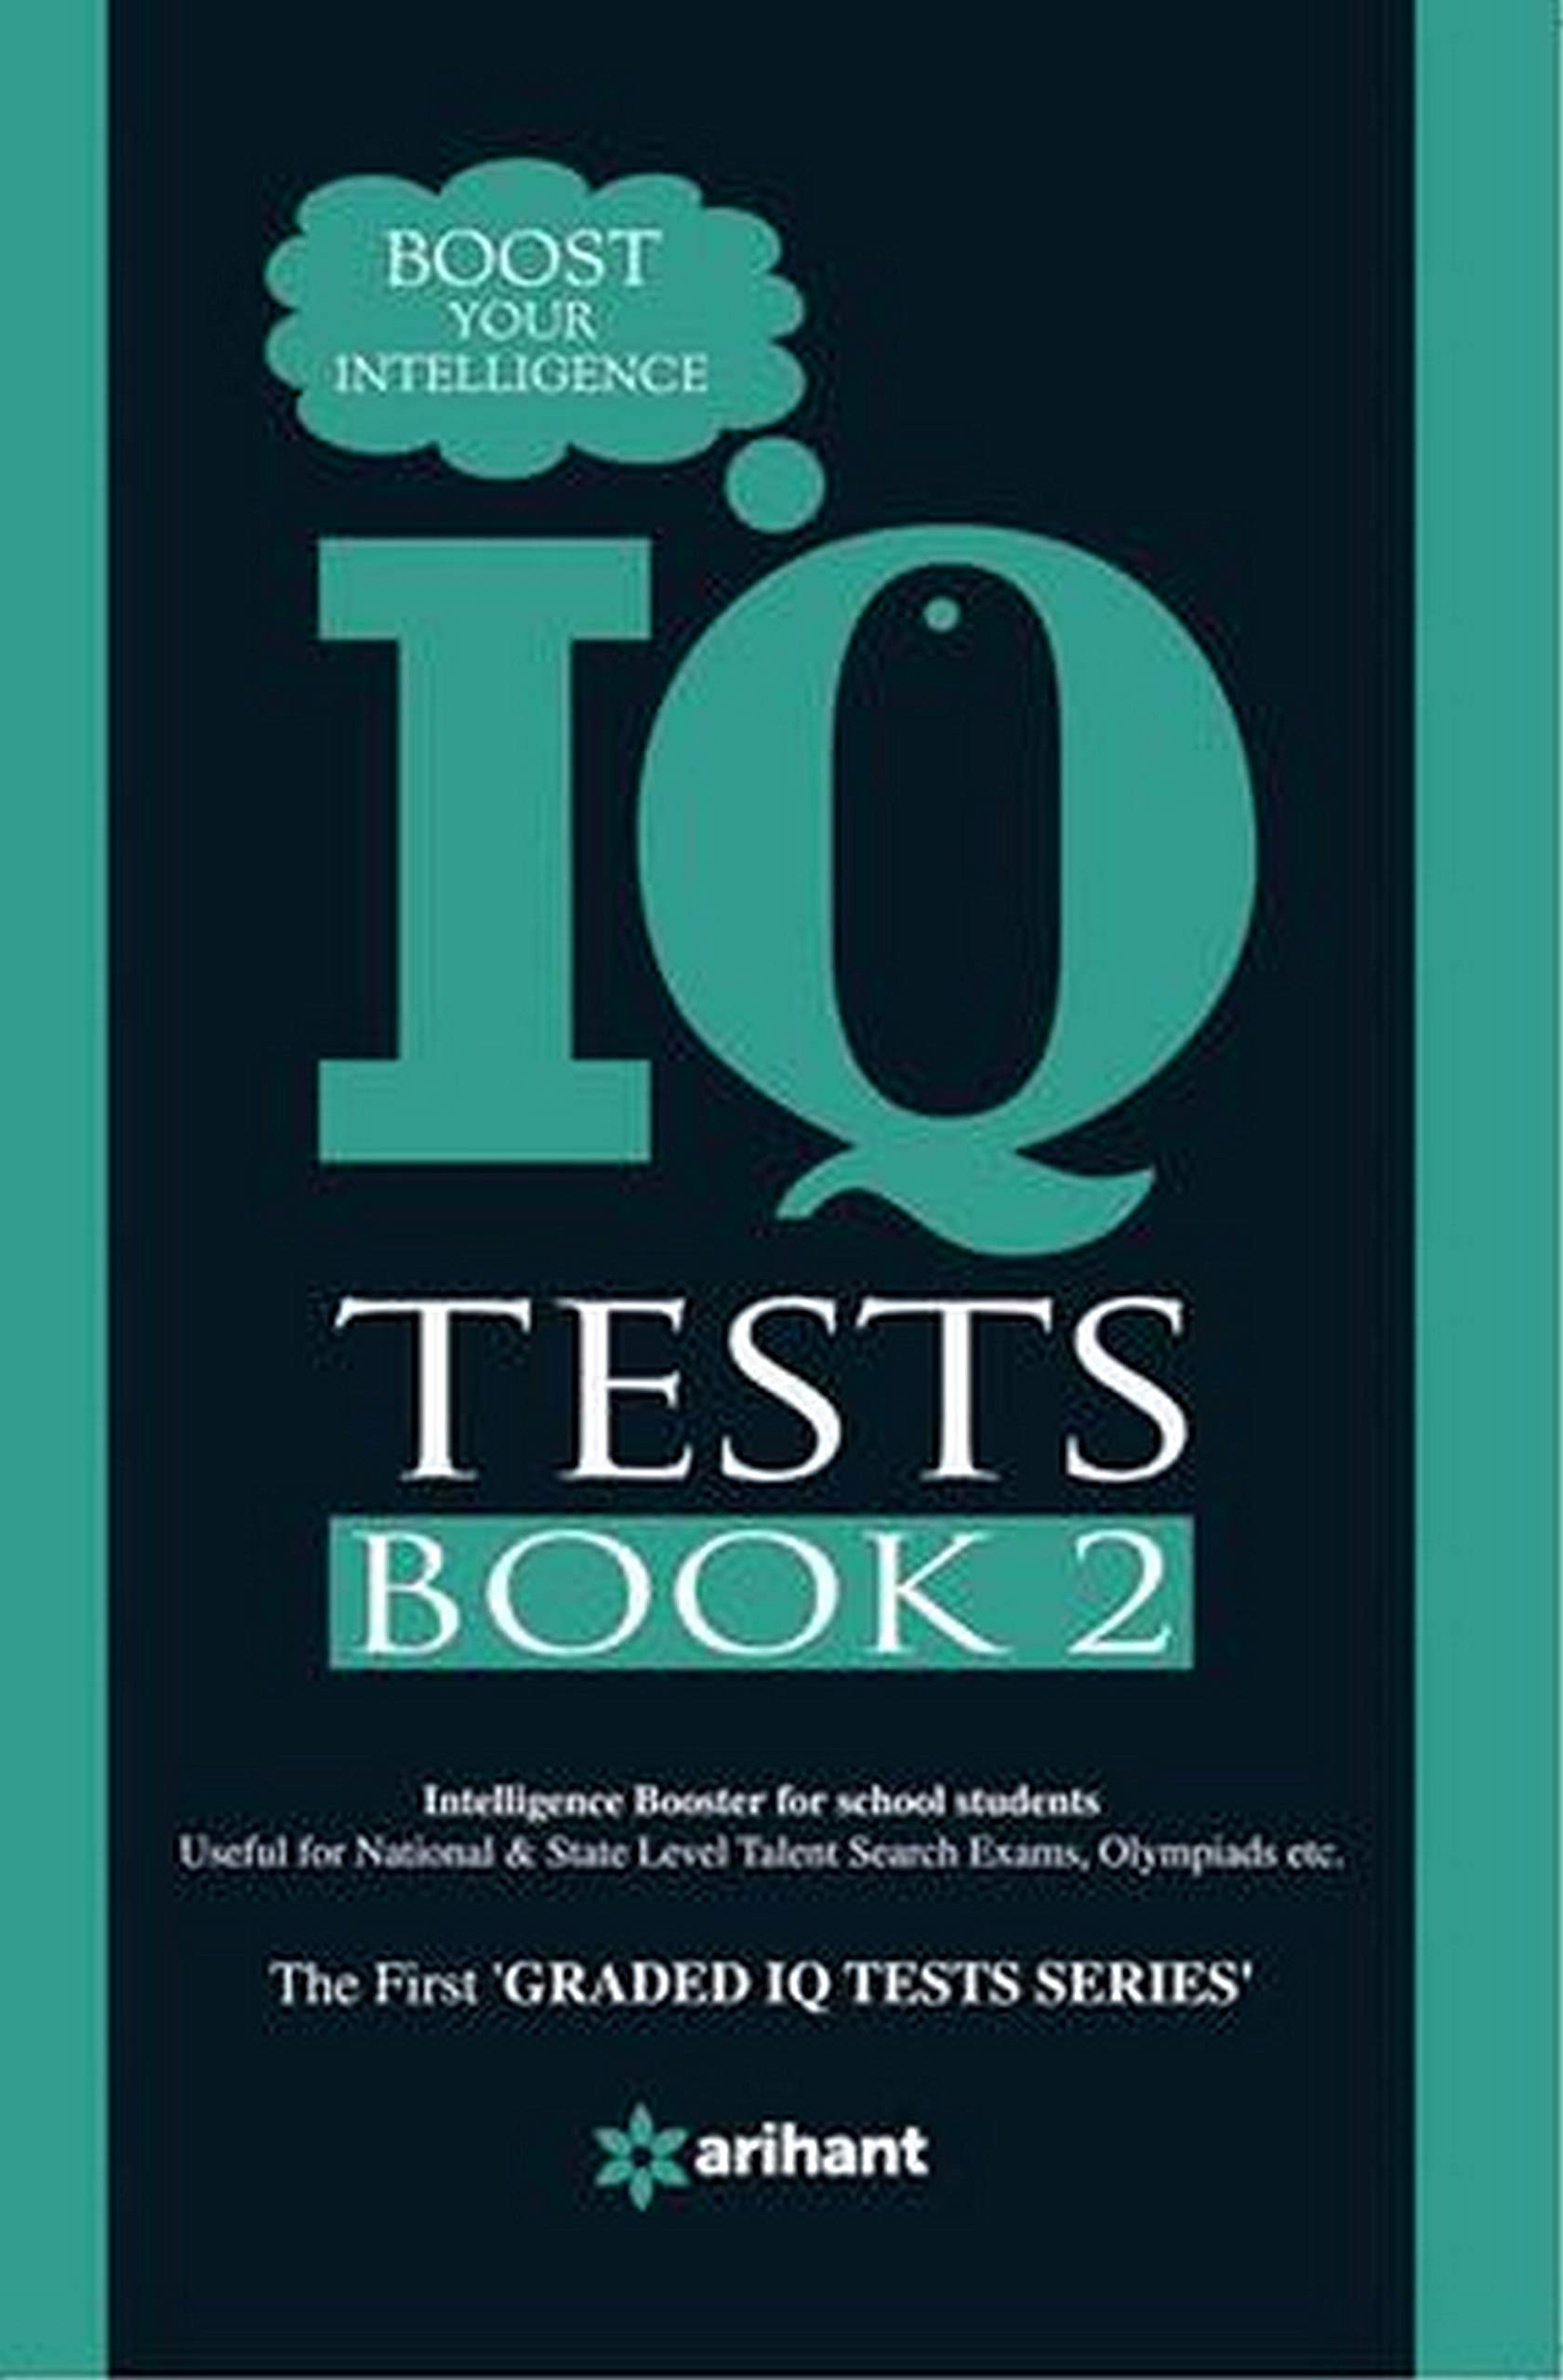 IQ Tests Book-2 - Boost Your Intelligence